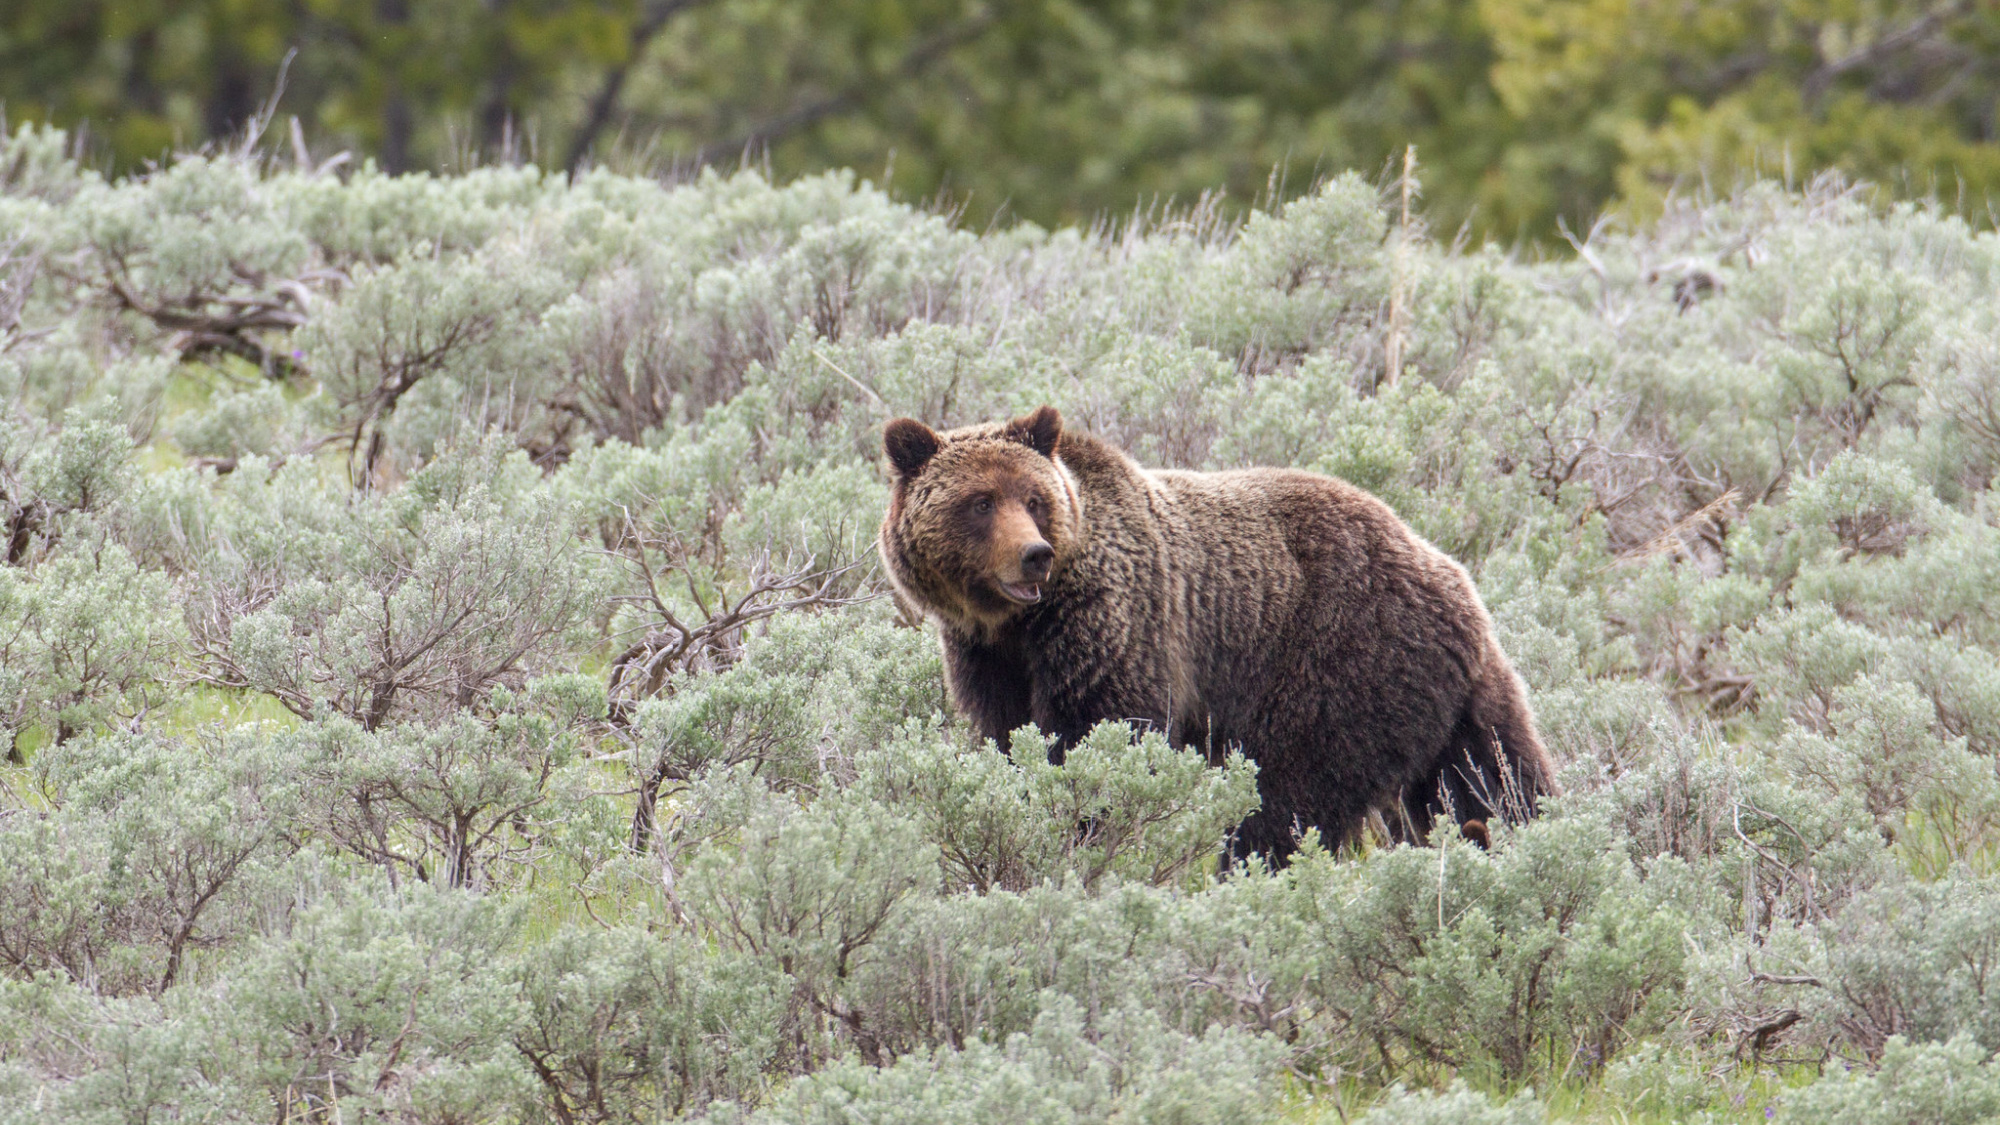 Woman Found Dead in Apparent Grizzly Attack Outside Yellowstone